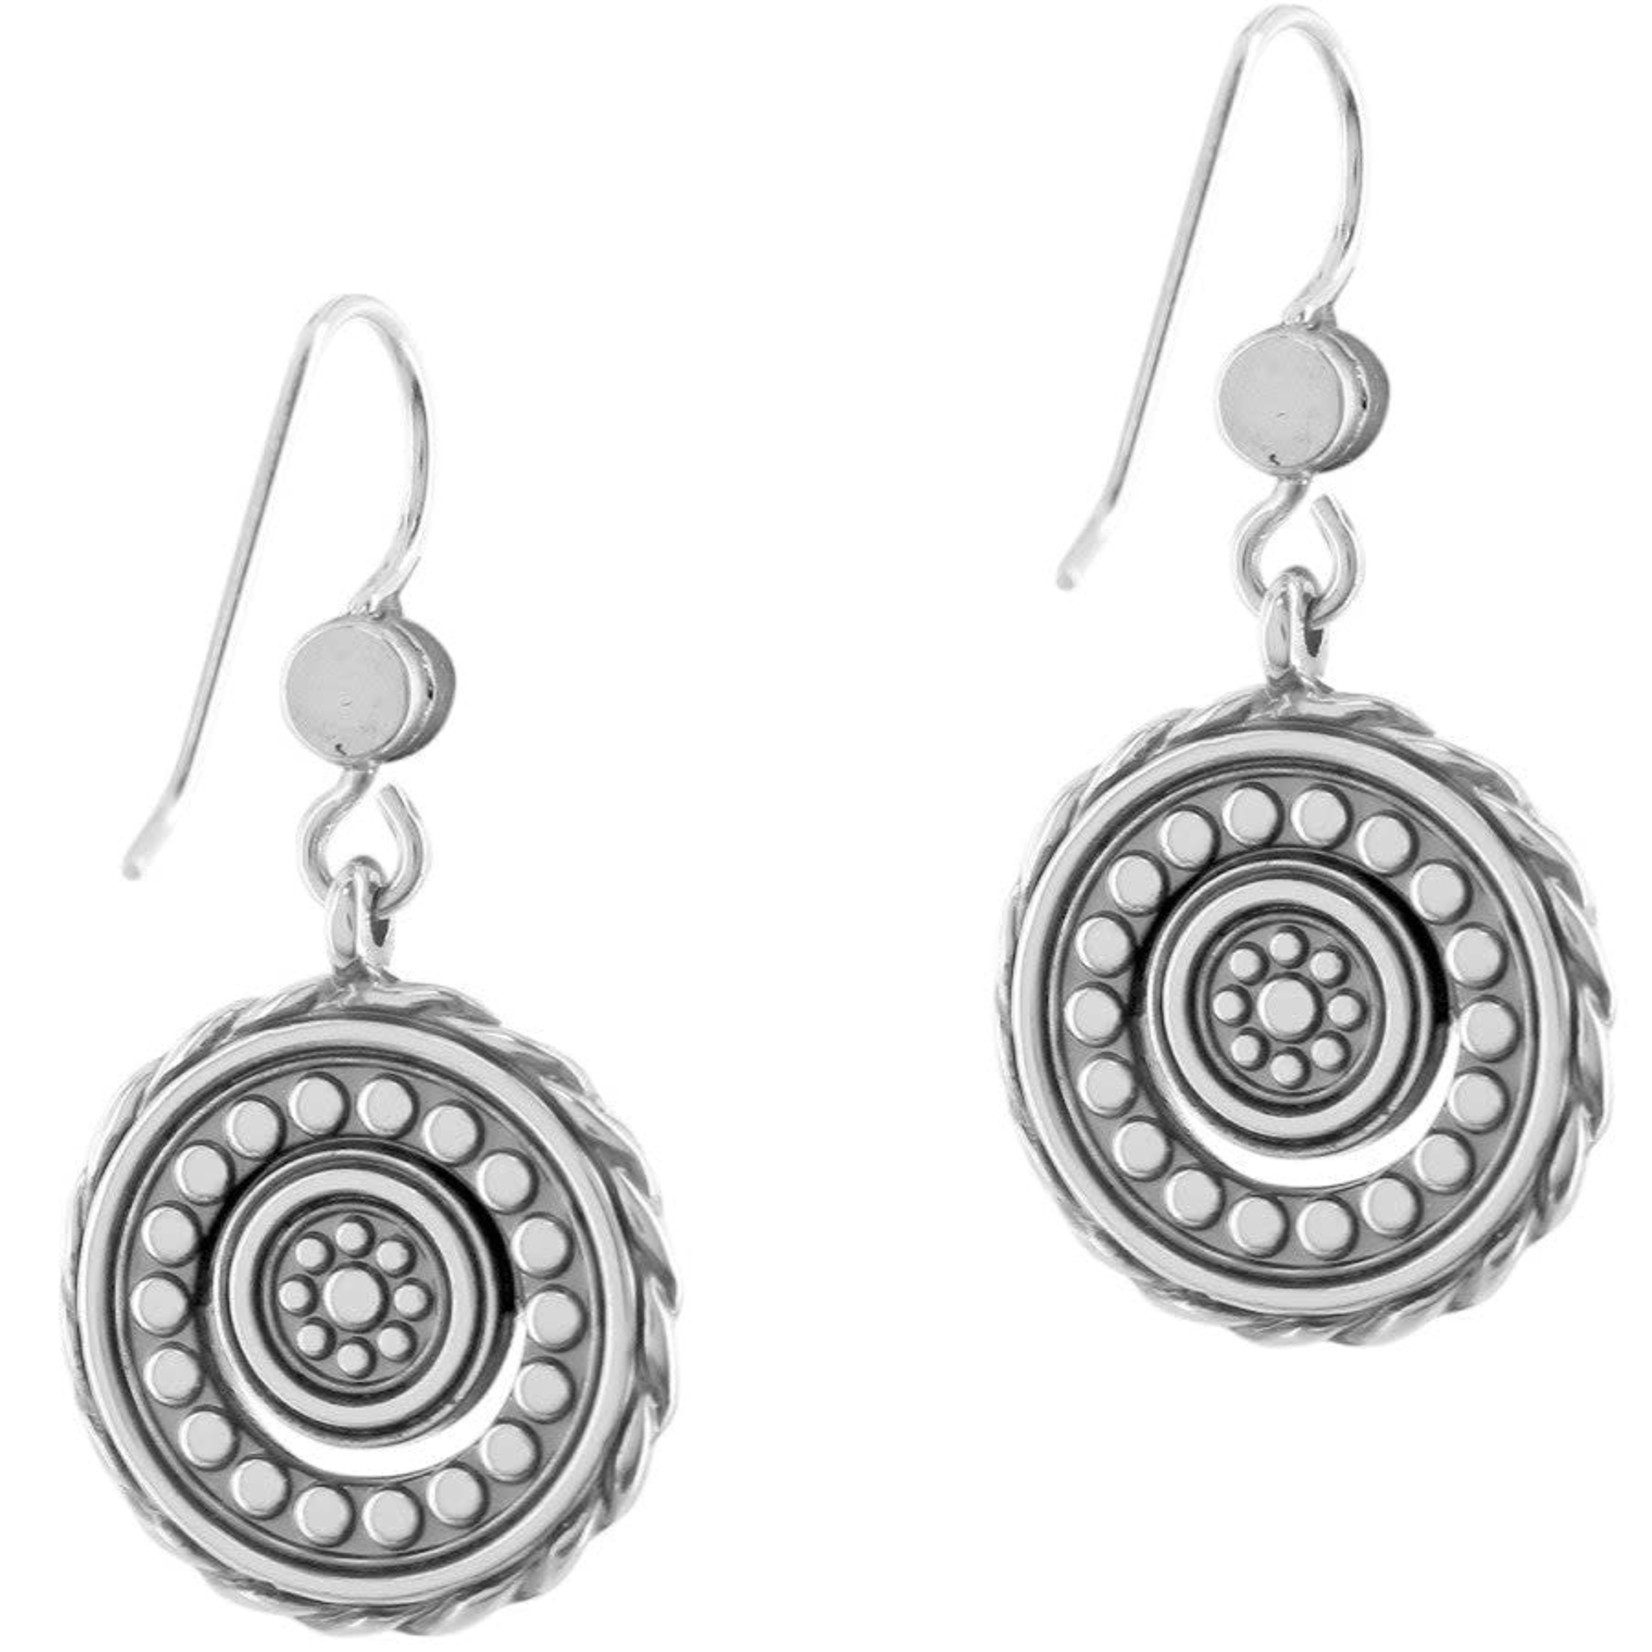 Brighton JA3623 Halo Eclipse French Wire Earrings